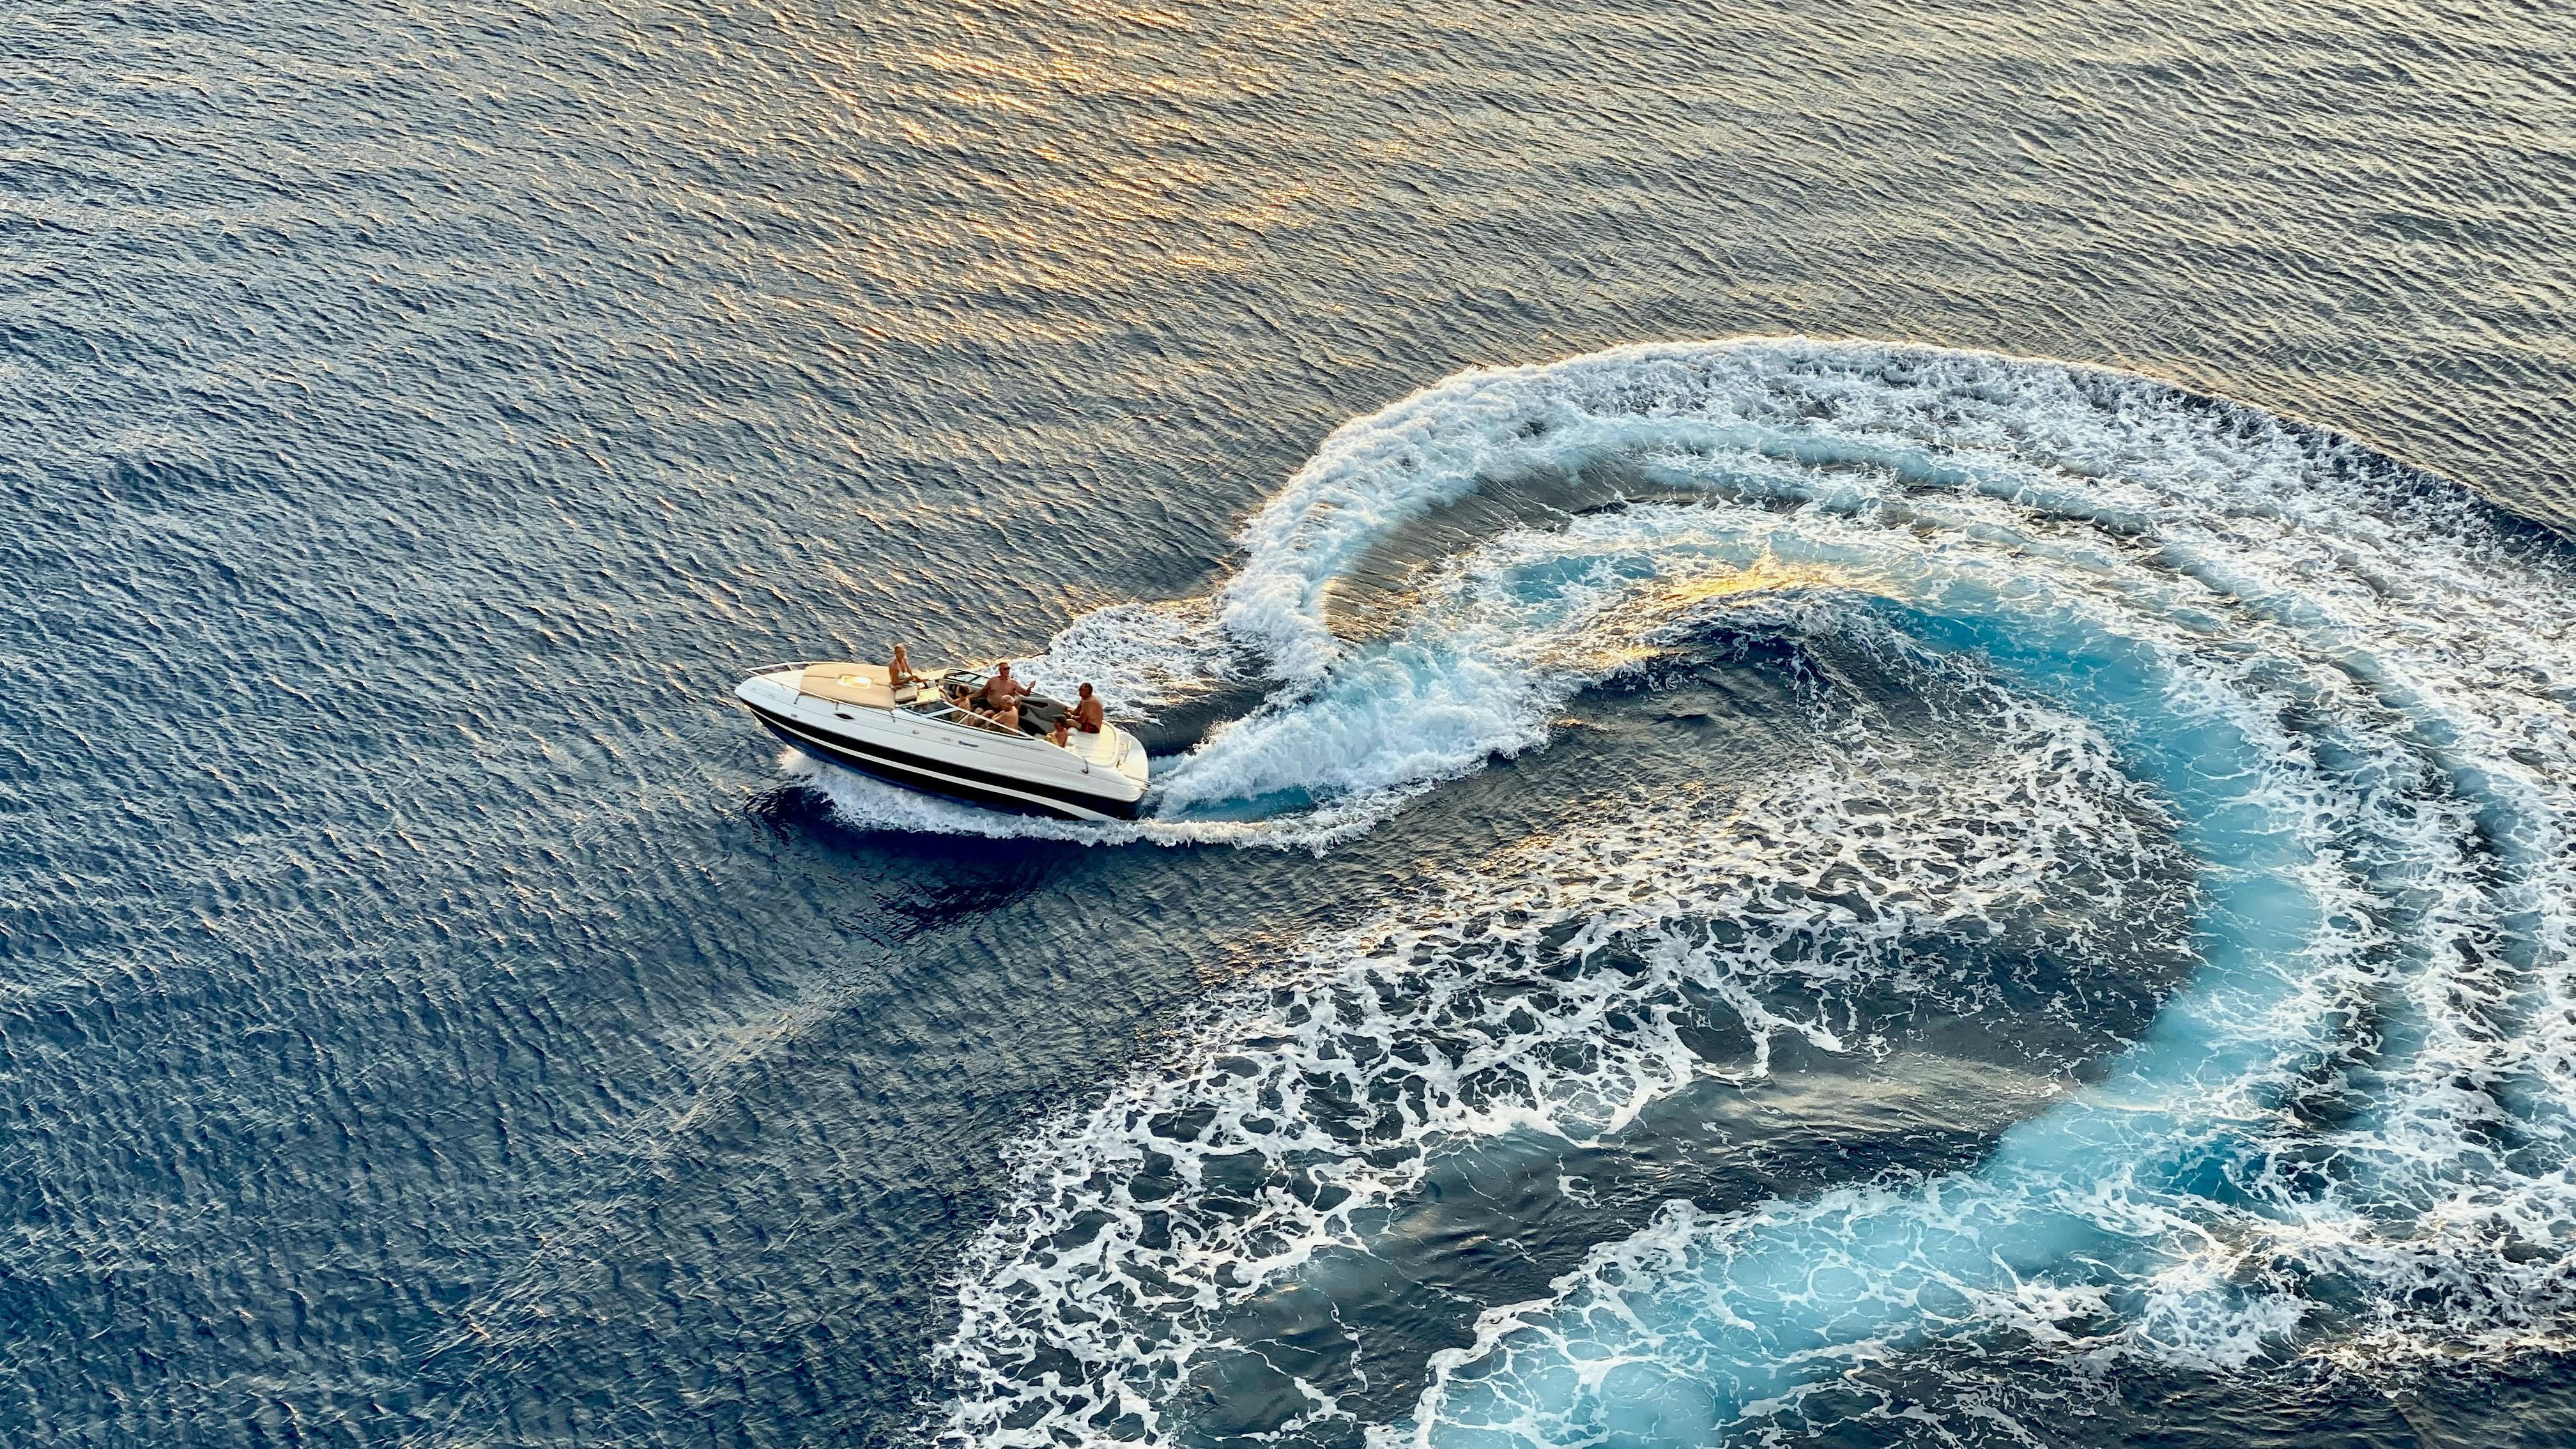 Private full-day tour on a Speedboat from Dubrovnik